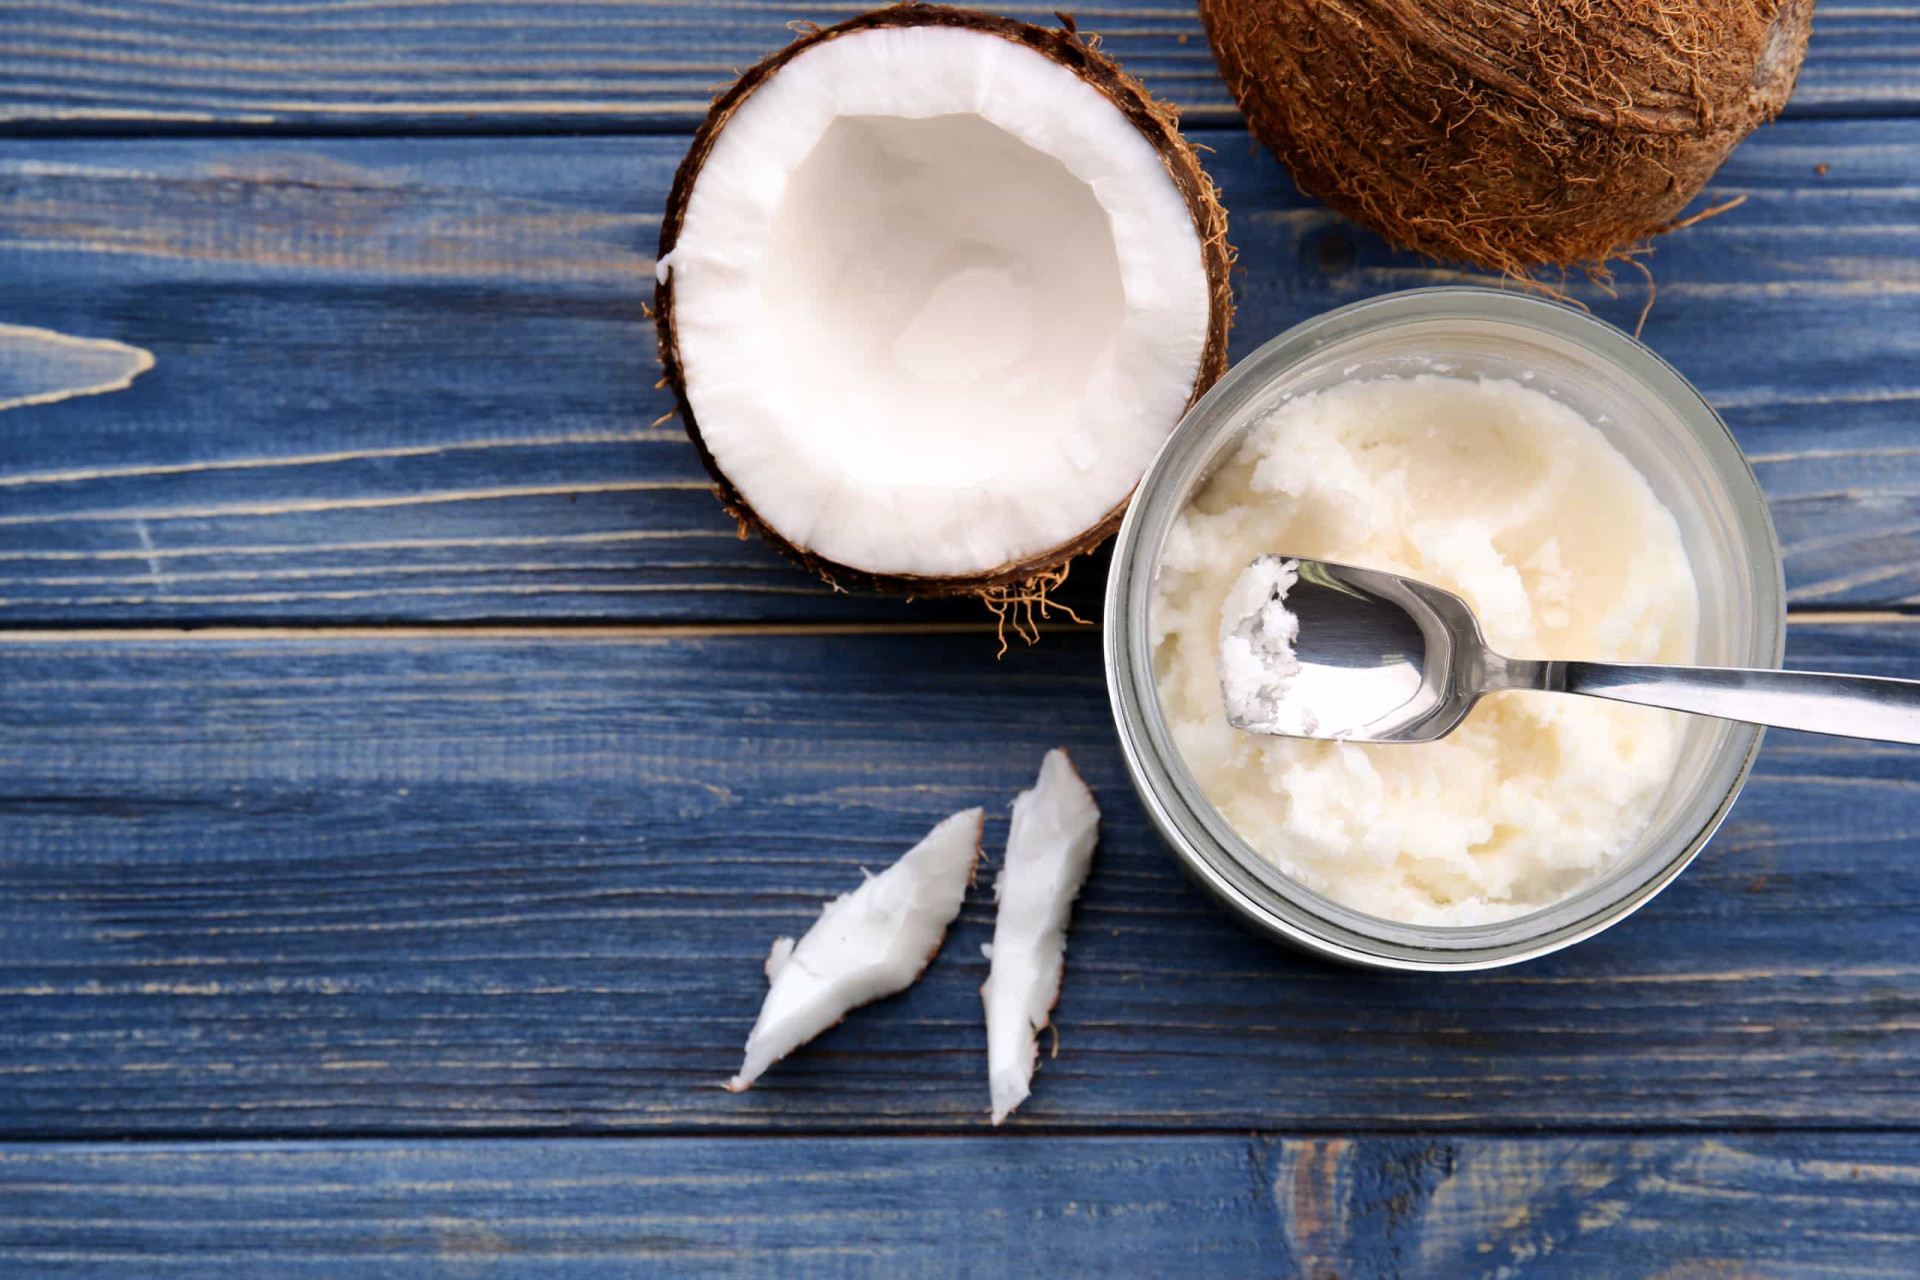 <p><span>If you have very dry skin, you might consider using coconut oil, although this can cause pimples if you are prone to developing clogged pores. </span></p><p>You may also like:<a href="https://www.starsinsider.com/n/454556?utm_source=msn.com&utm_medium=display&utm_campaign=referral_description&utm_content=494861en-en"> The worst movie sequels of all time </a></p>